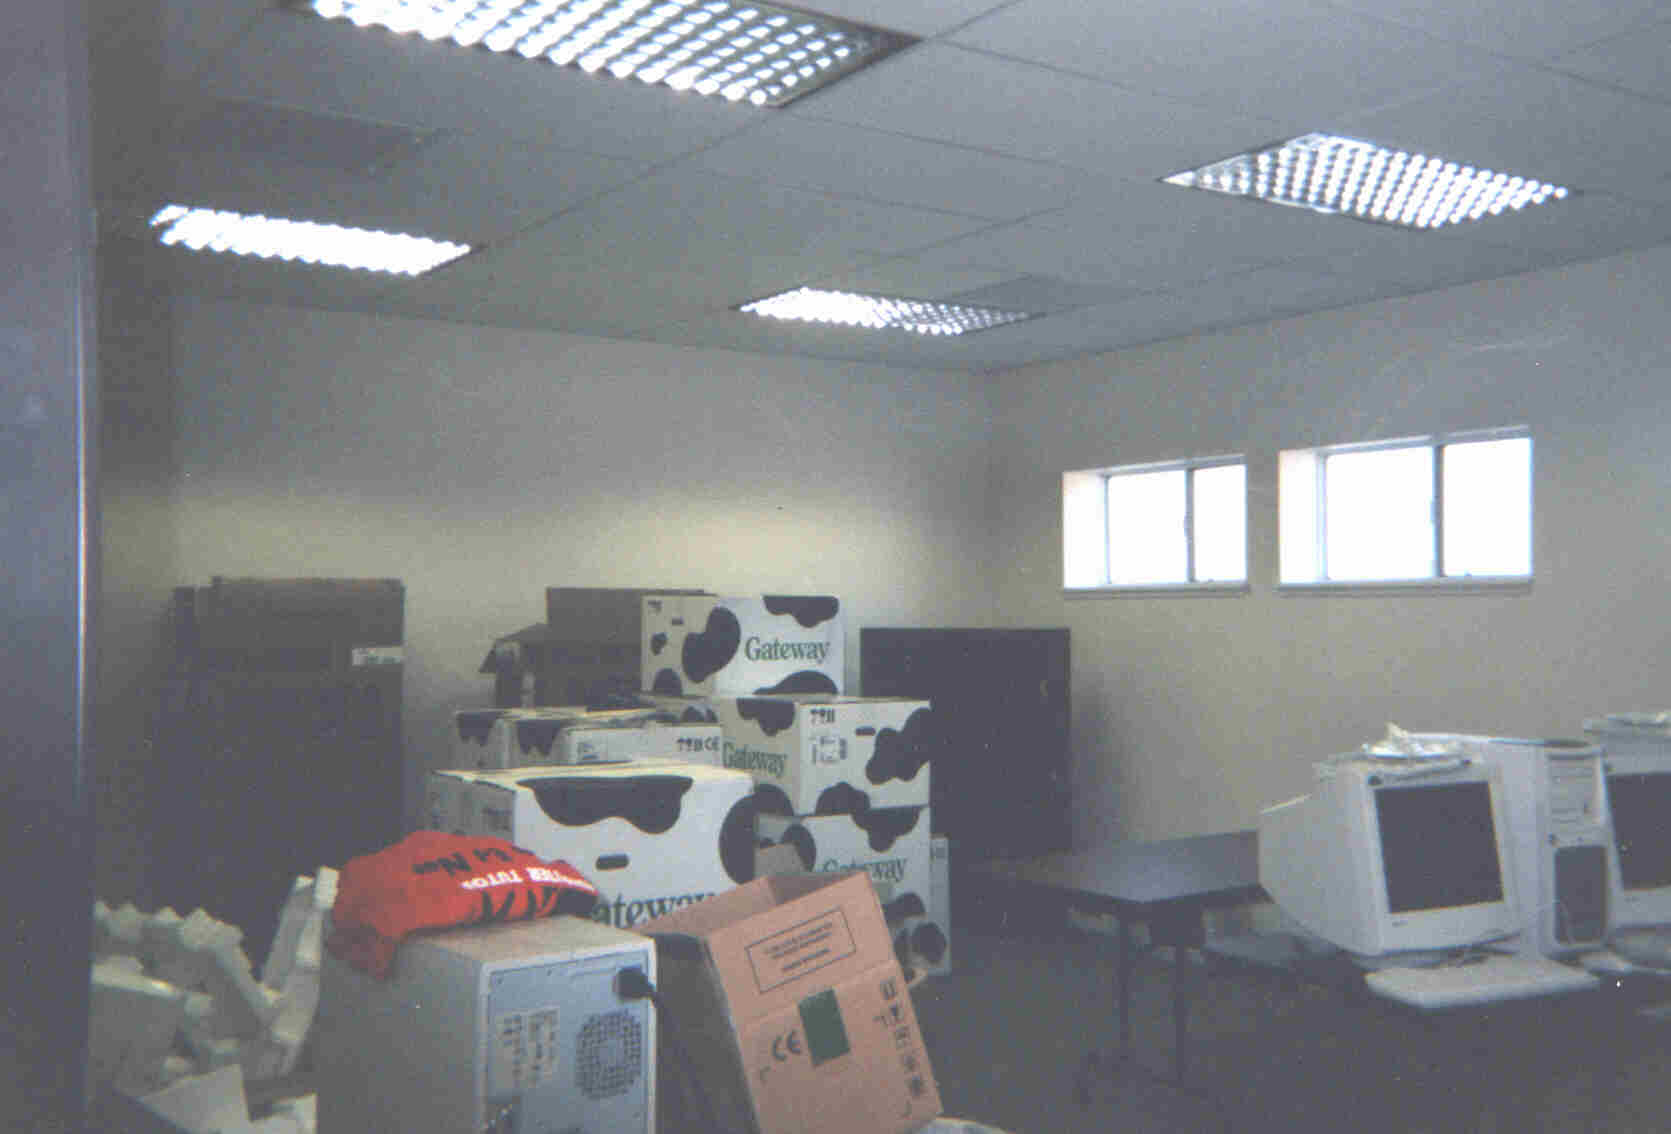 The computer lab fills with boxes as we unpack